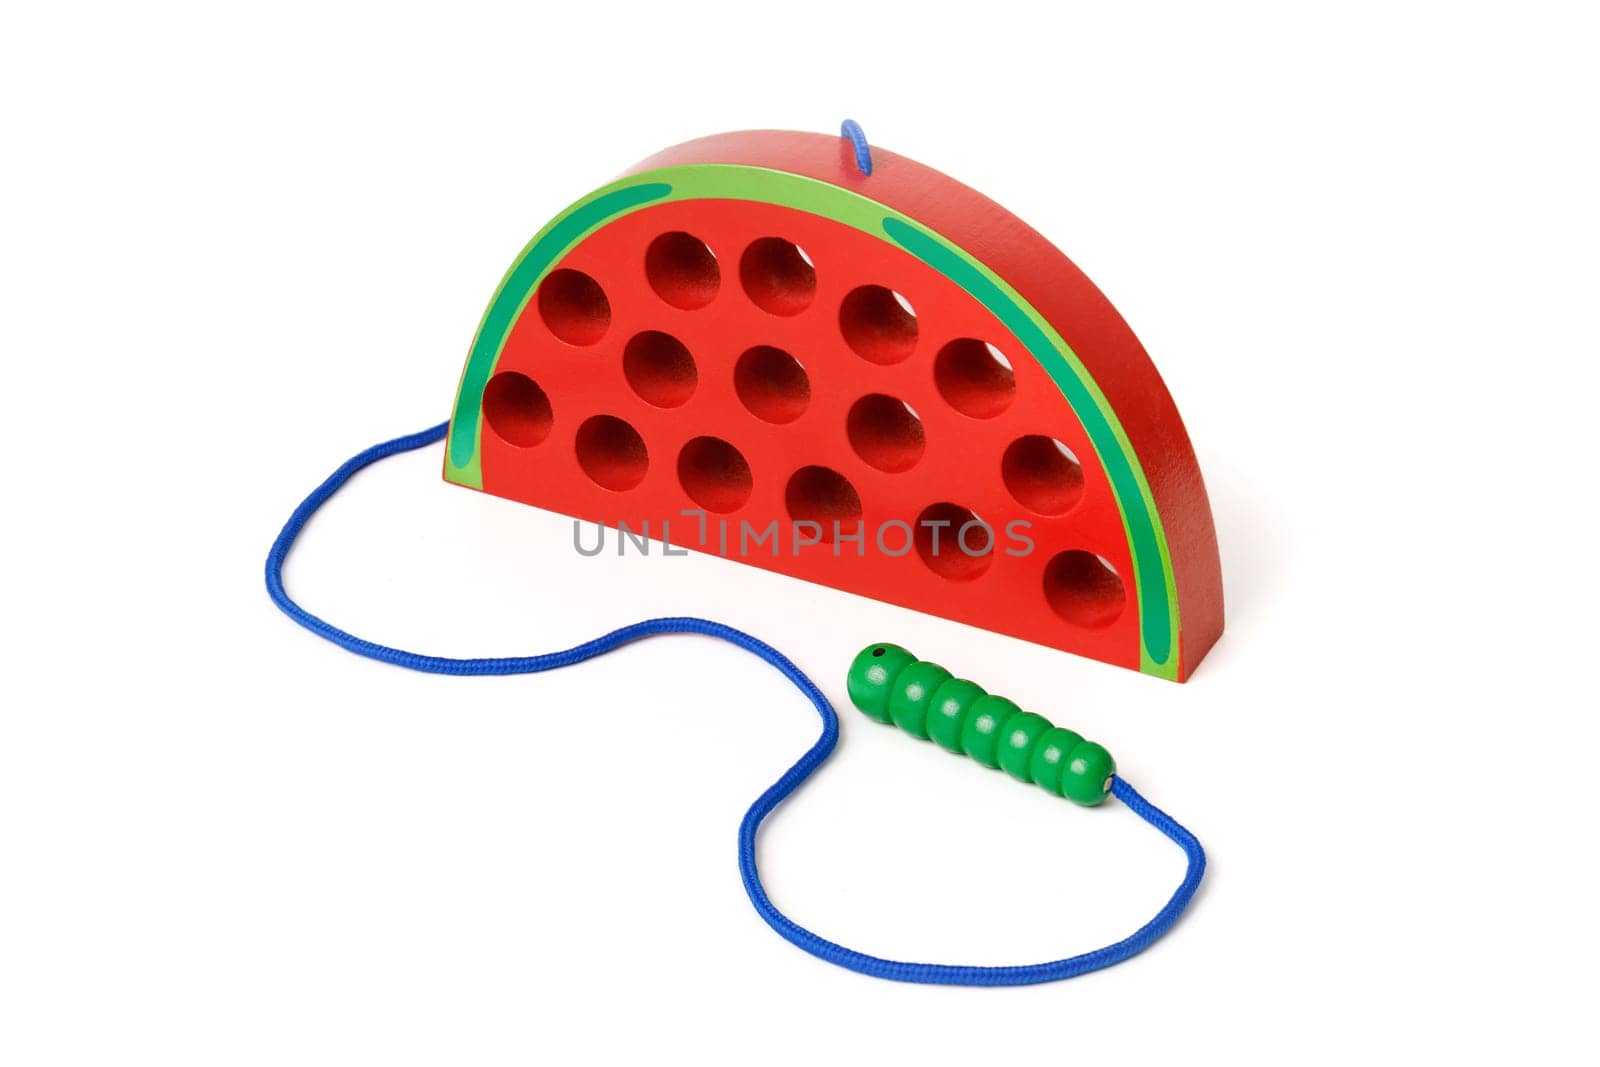 Kid's wooden toy in the shape of a red watermelon with a worm on a rope, toy for developing fine hand motor skills, isolated on white background by Rom4ek